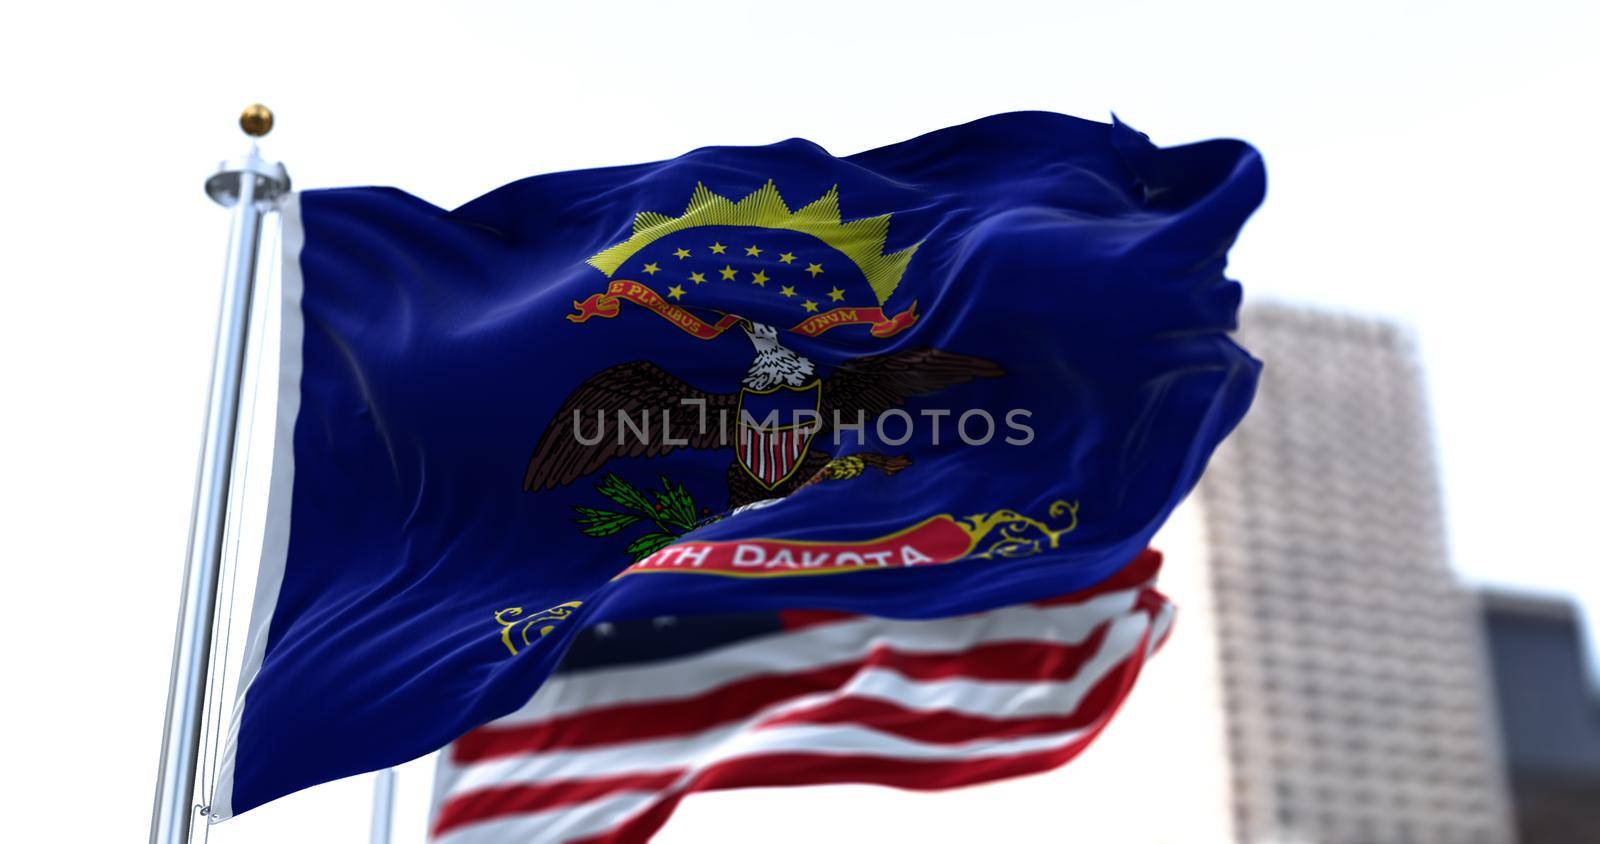 the flag of the US state of North Dakota waving in the wind with the American stars and stripes flag blurred in the background by rarrarorro